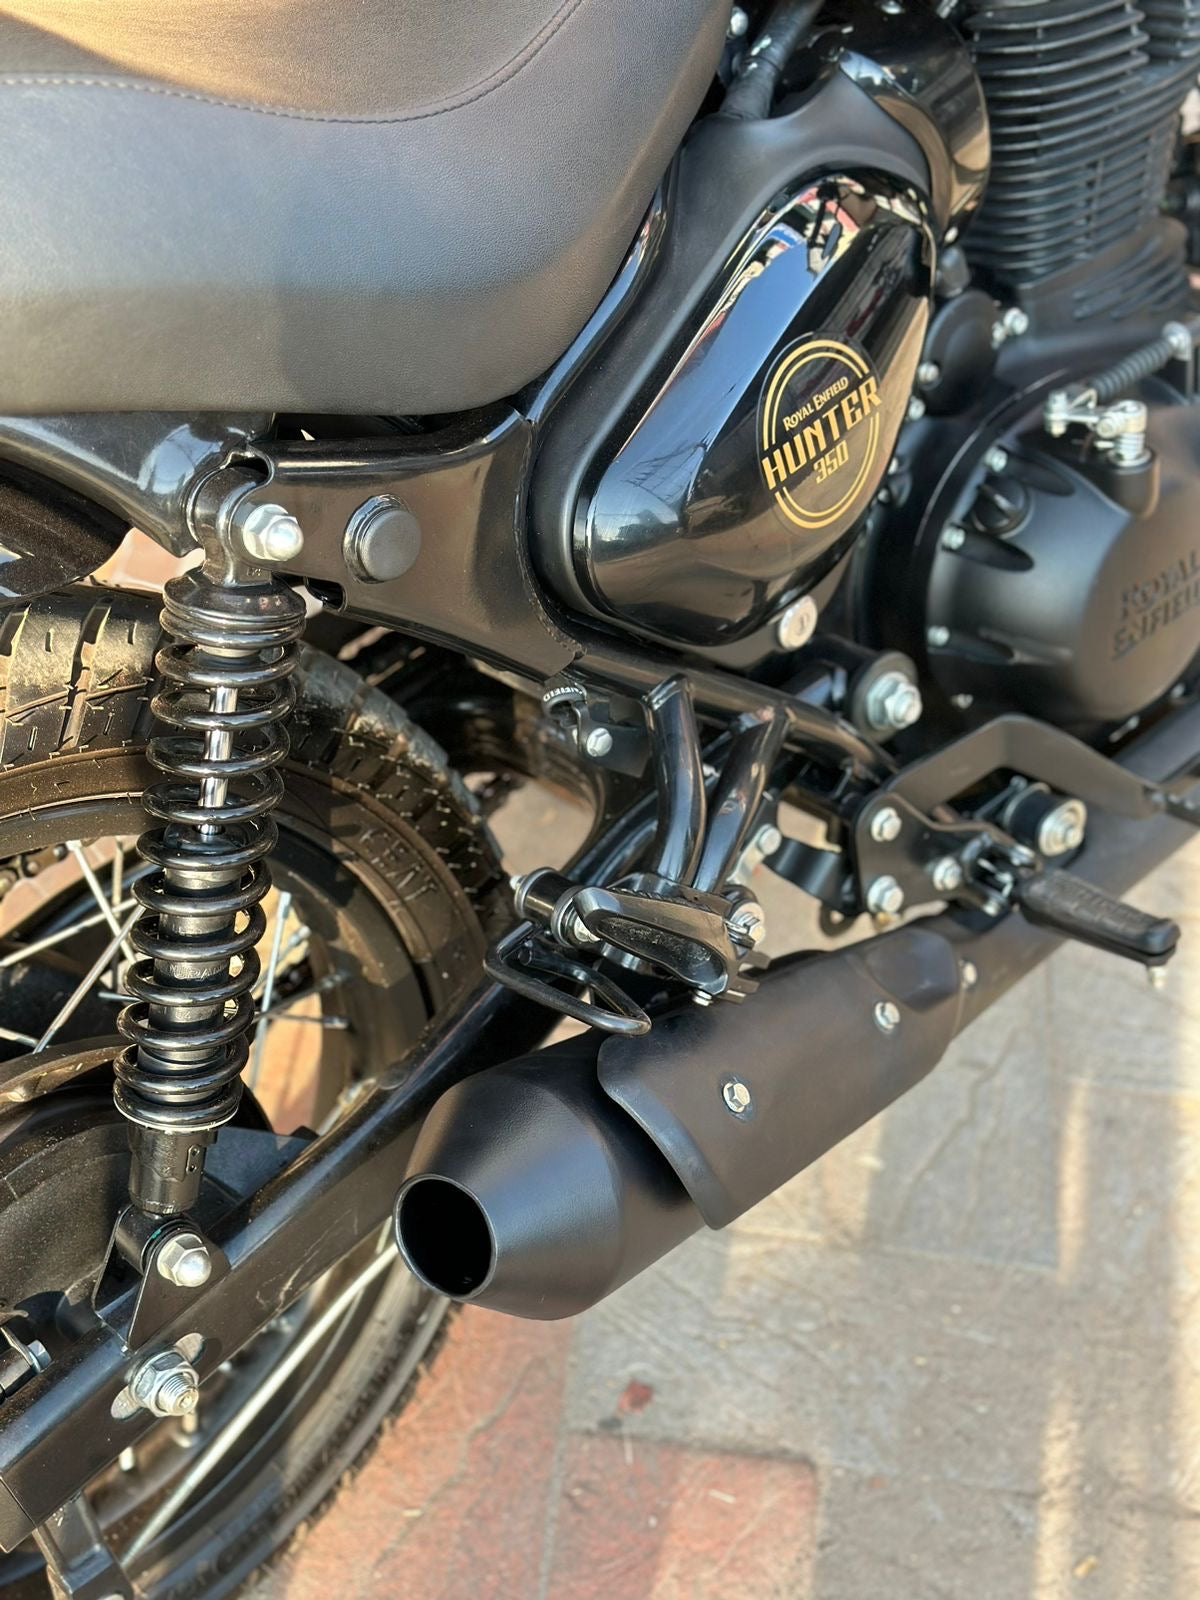 Powerage exhaust for hunter 350